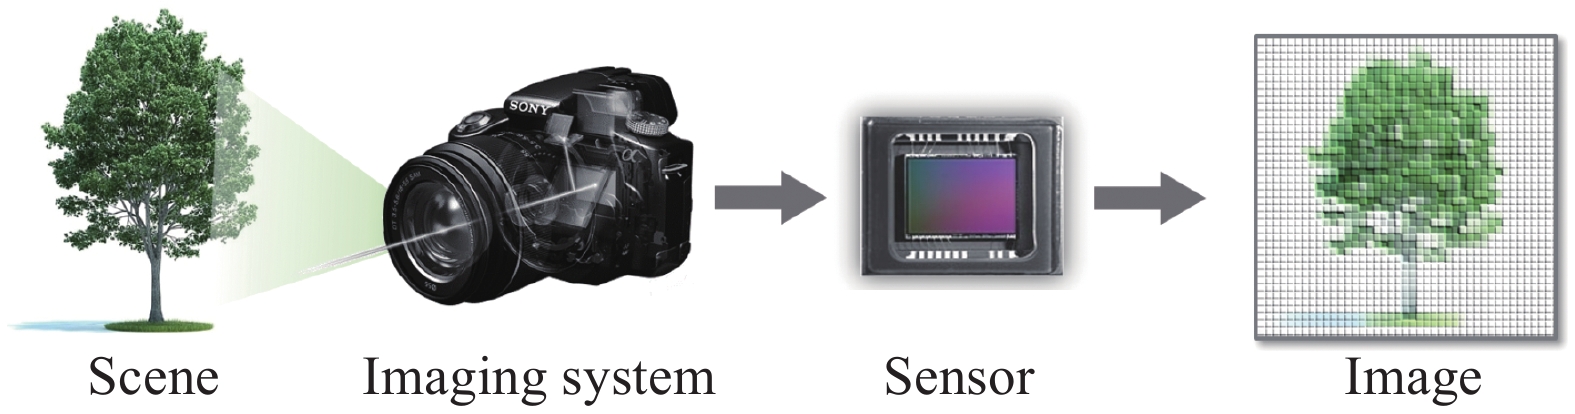 Conventional optical imaging process